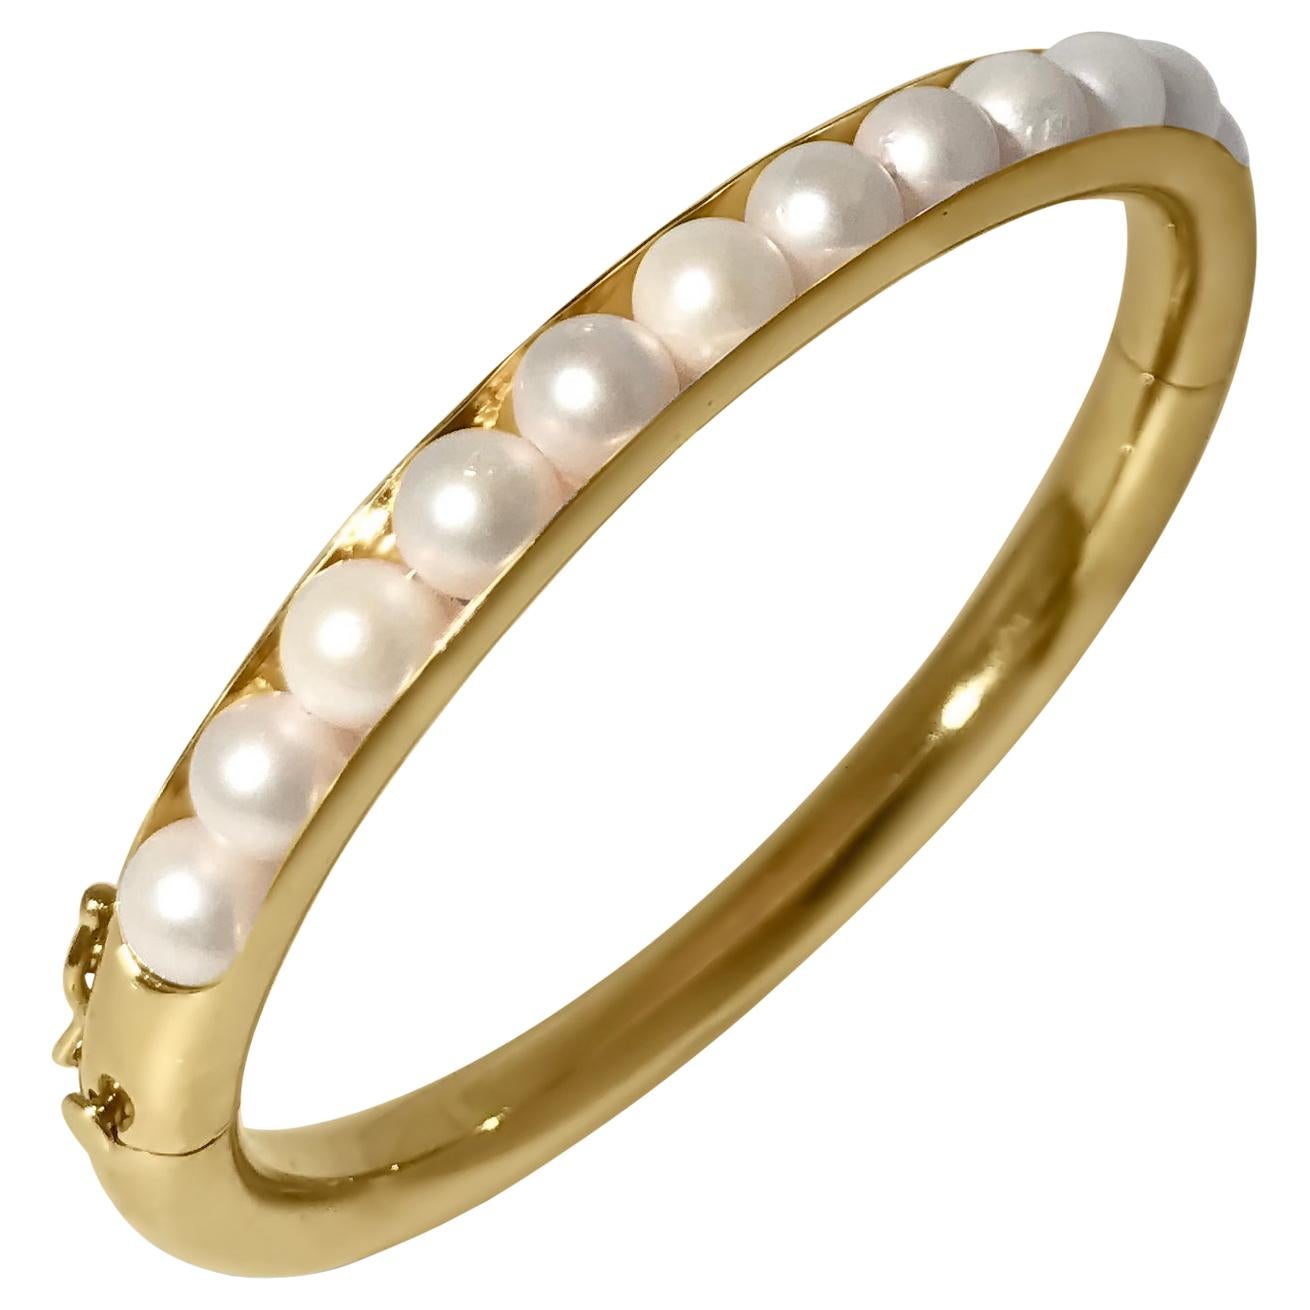 14 Karat Yellow Gold Oval Bangle Bracelet with T-Pearls by Manart